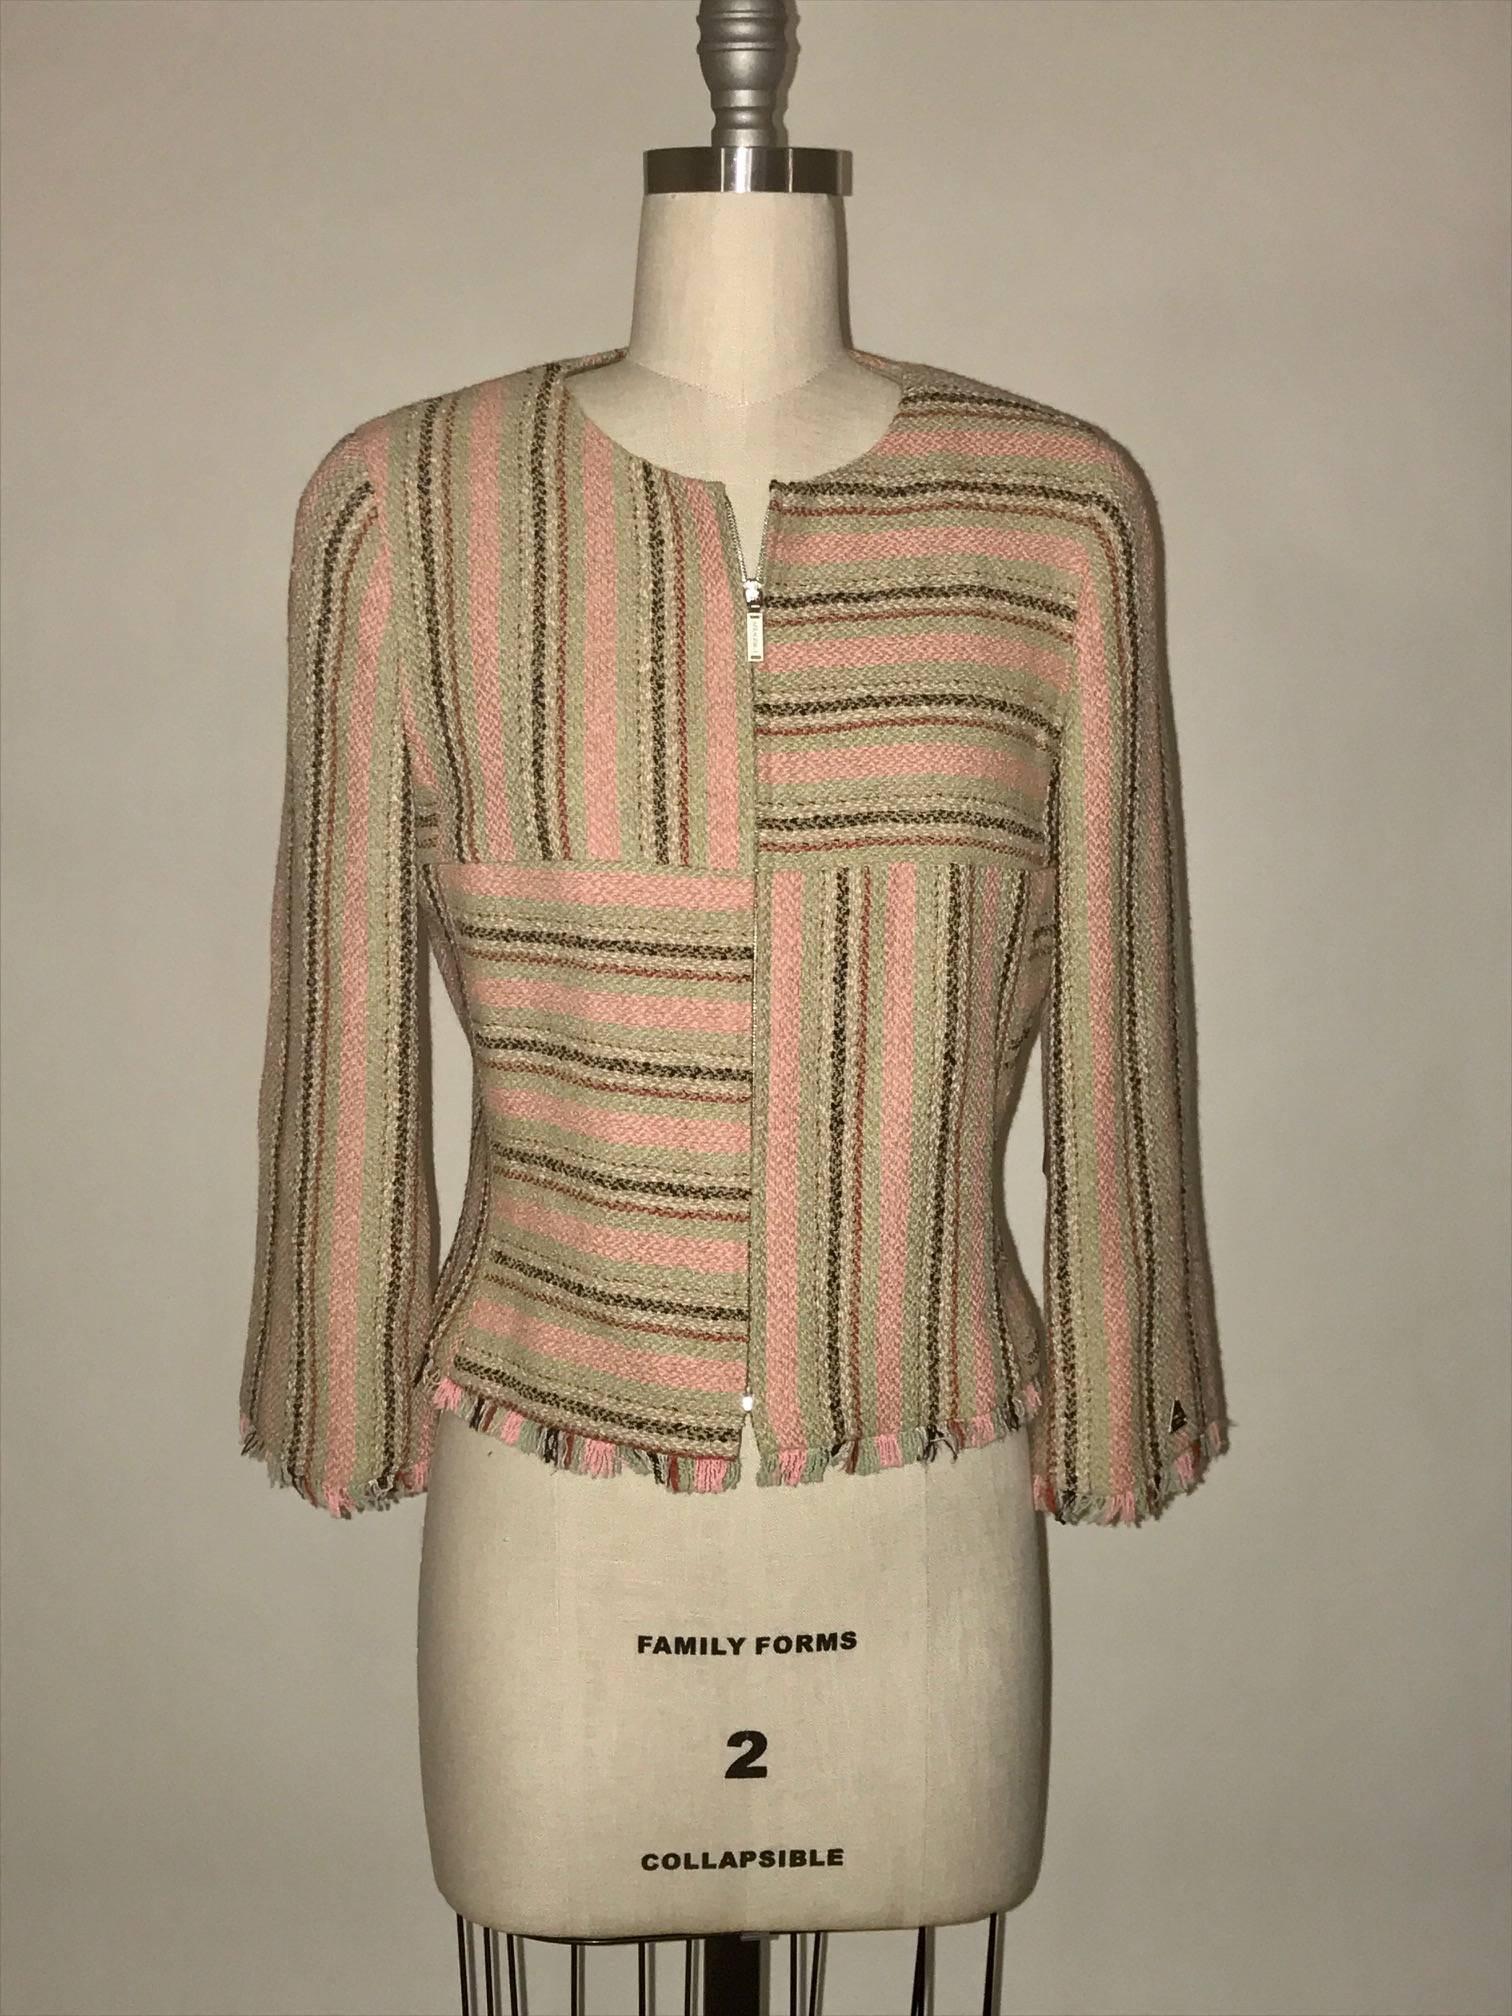 Chanel tweed jacket in muted pink, sage green, natural, and red stripes. Fringed, raw edge trim. Branded 'Chanel' at zipper front and 'Chanel Paris' on triangular charm at cuff. Features signature Chanel chain detailing at bottom of interior